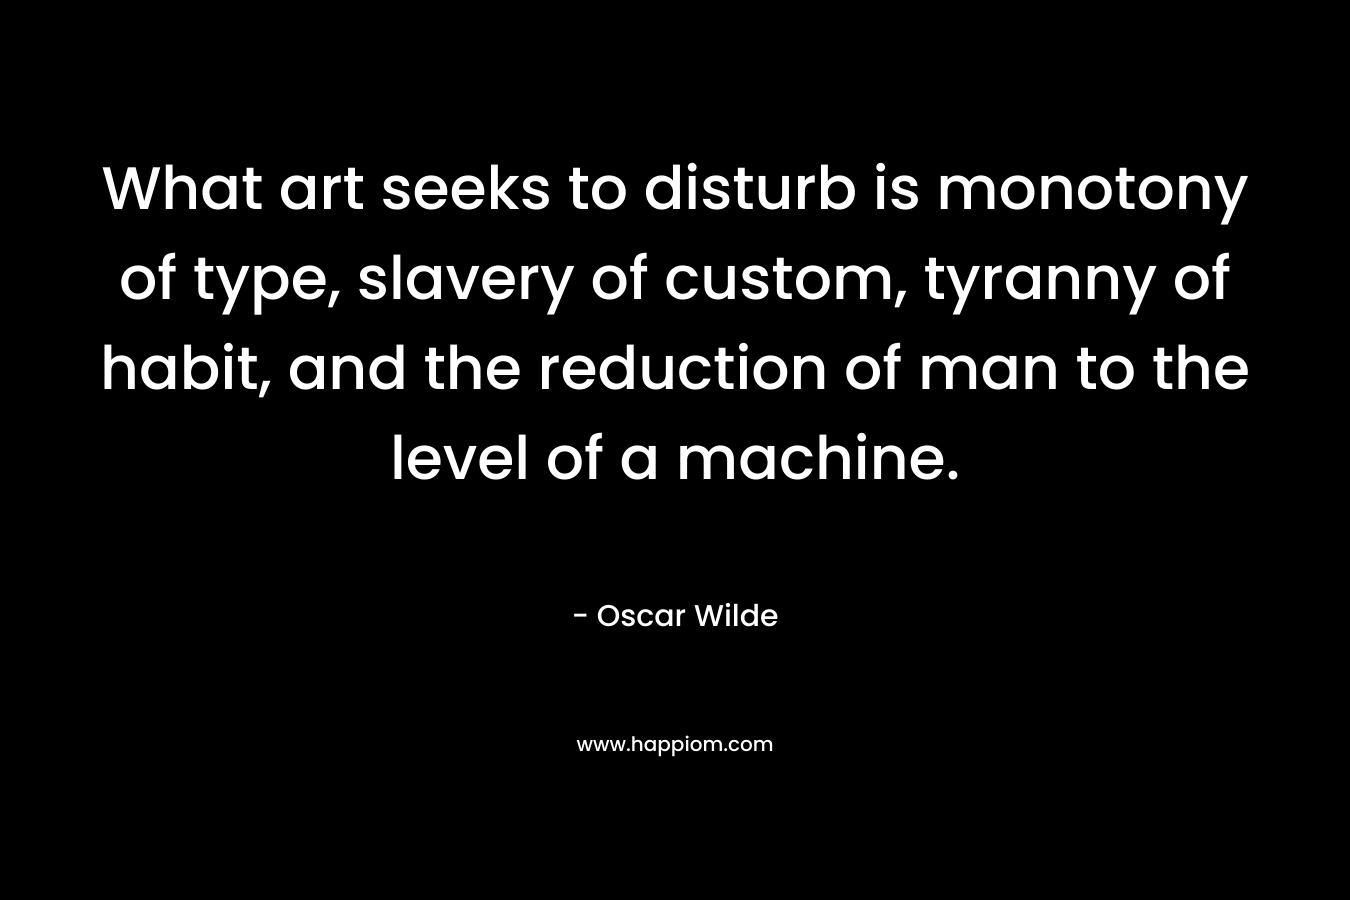 What art seeks to disturb is monotony of type, slavery of custom, tyranny of habit, and the reduction of man to the level of a machine. – Oscar Wilde